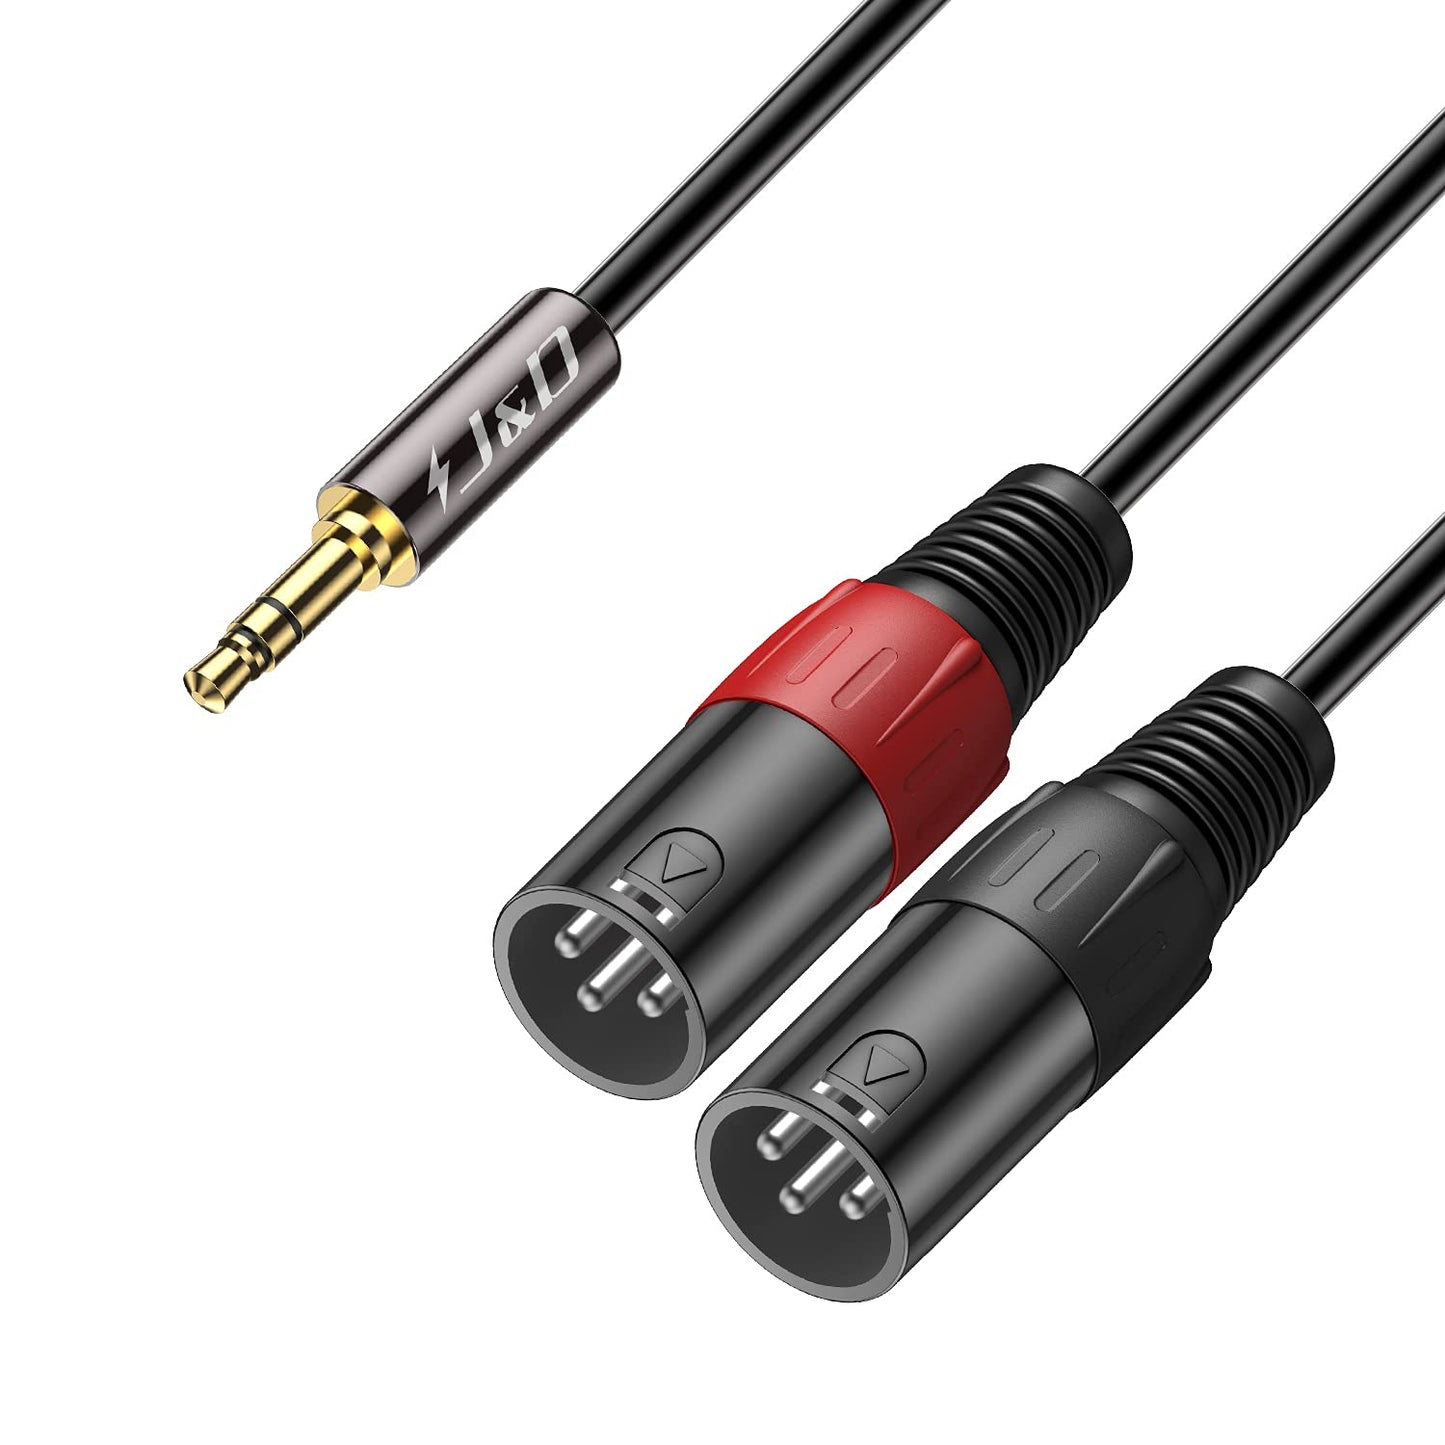 XLR Cable from J&D Tech